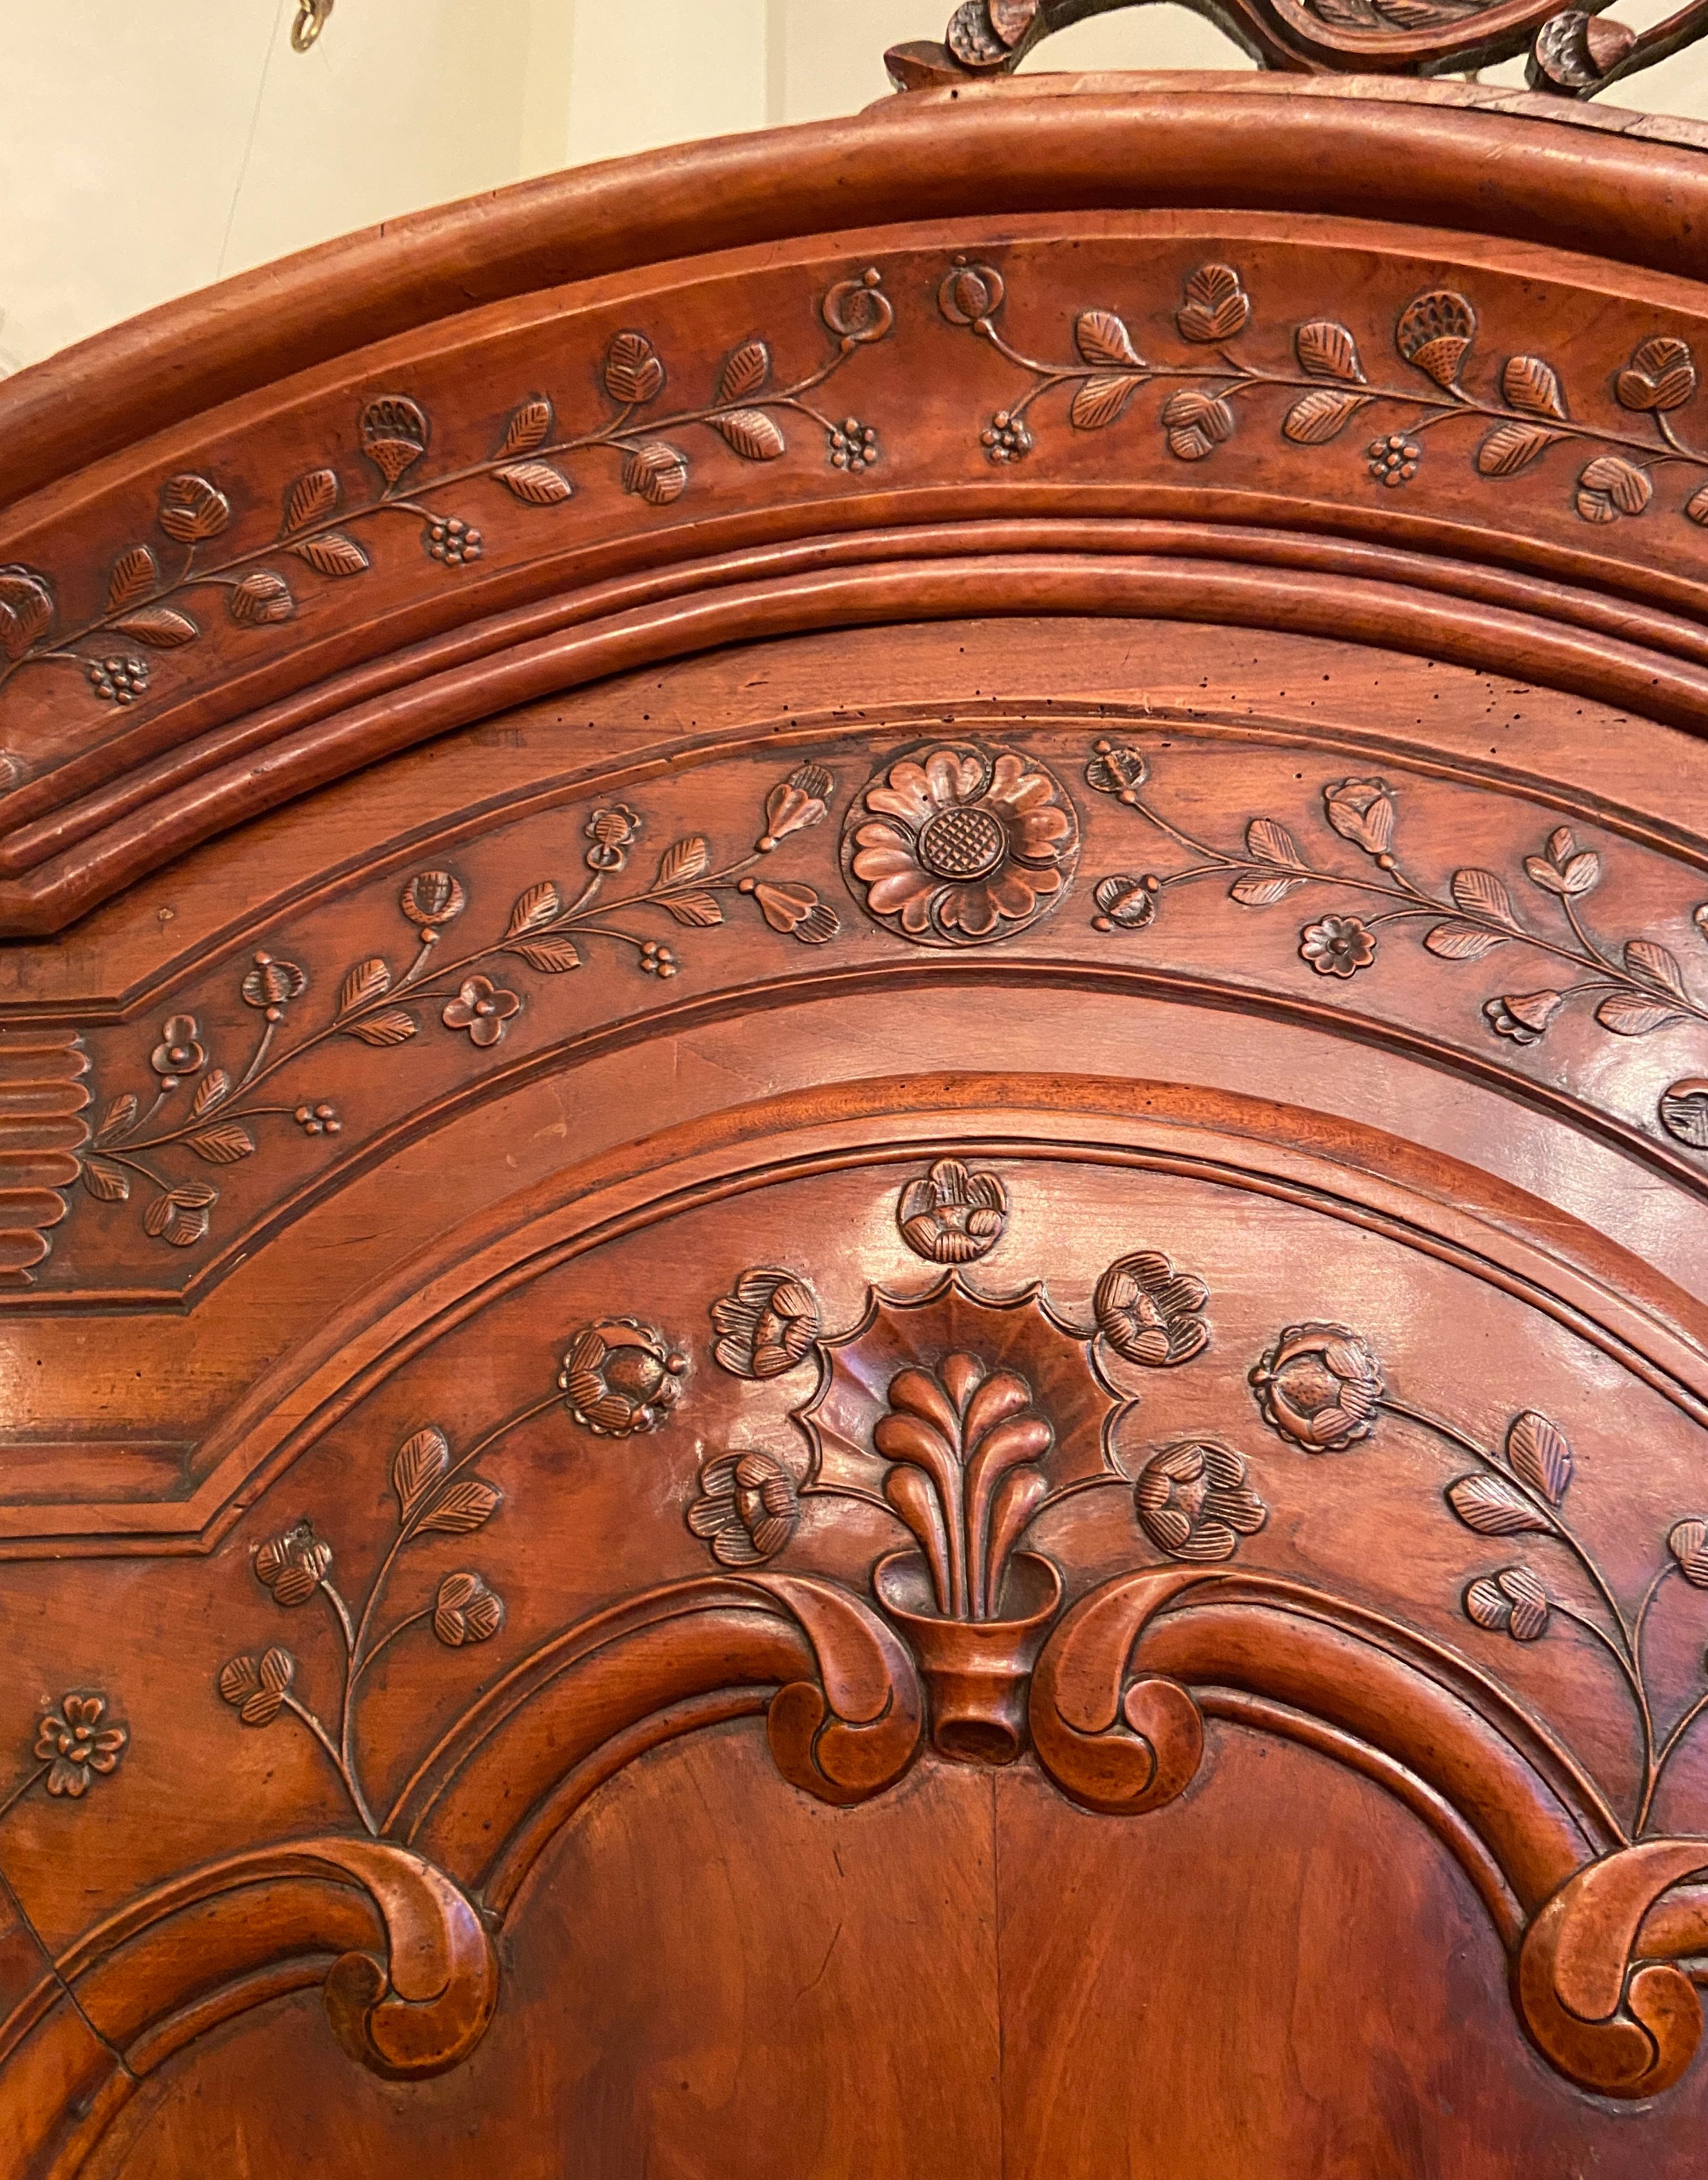 19th Century Antique French Carved Cherry Wood Armoire De Breton Dated October 13th, 1846